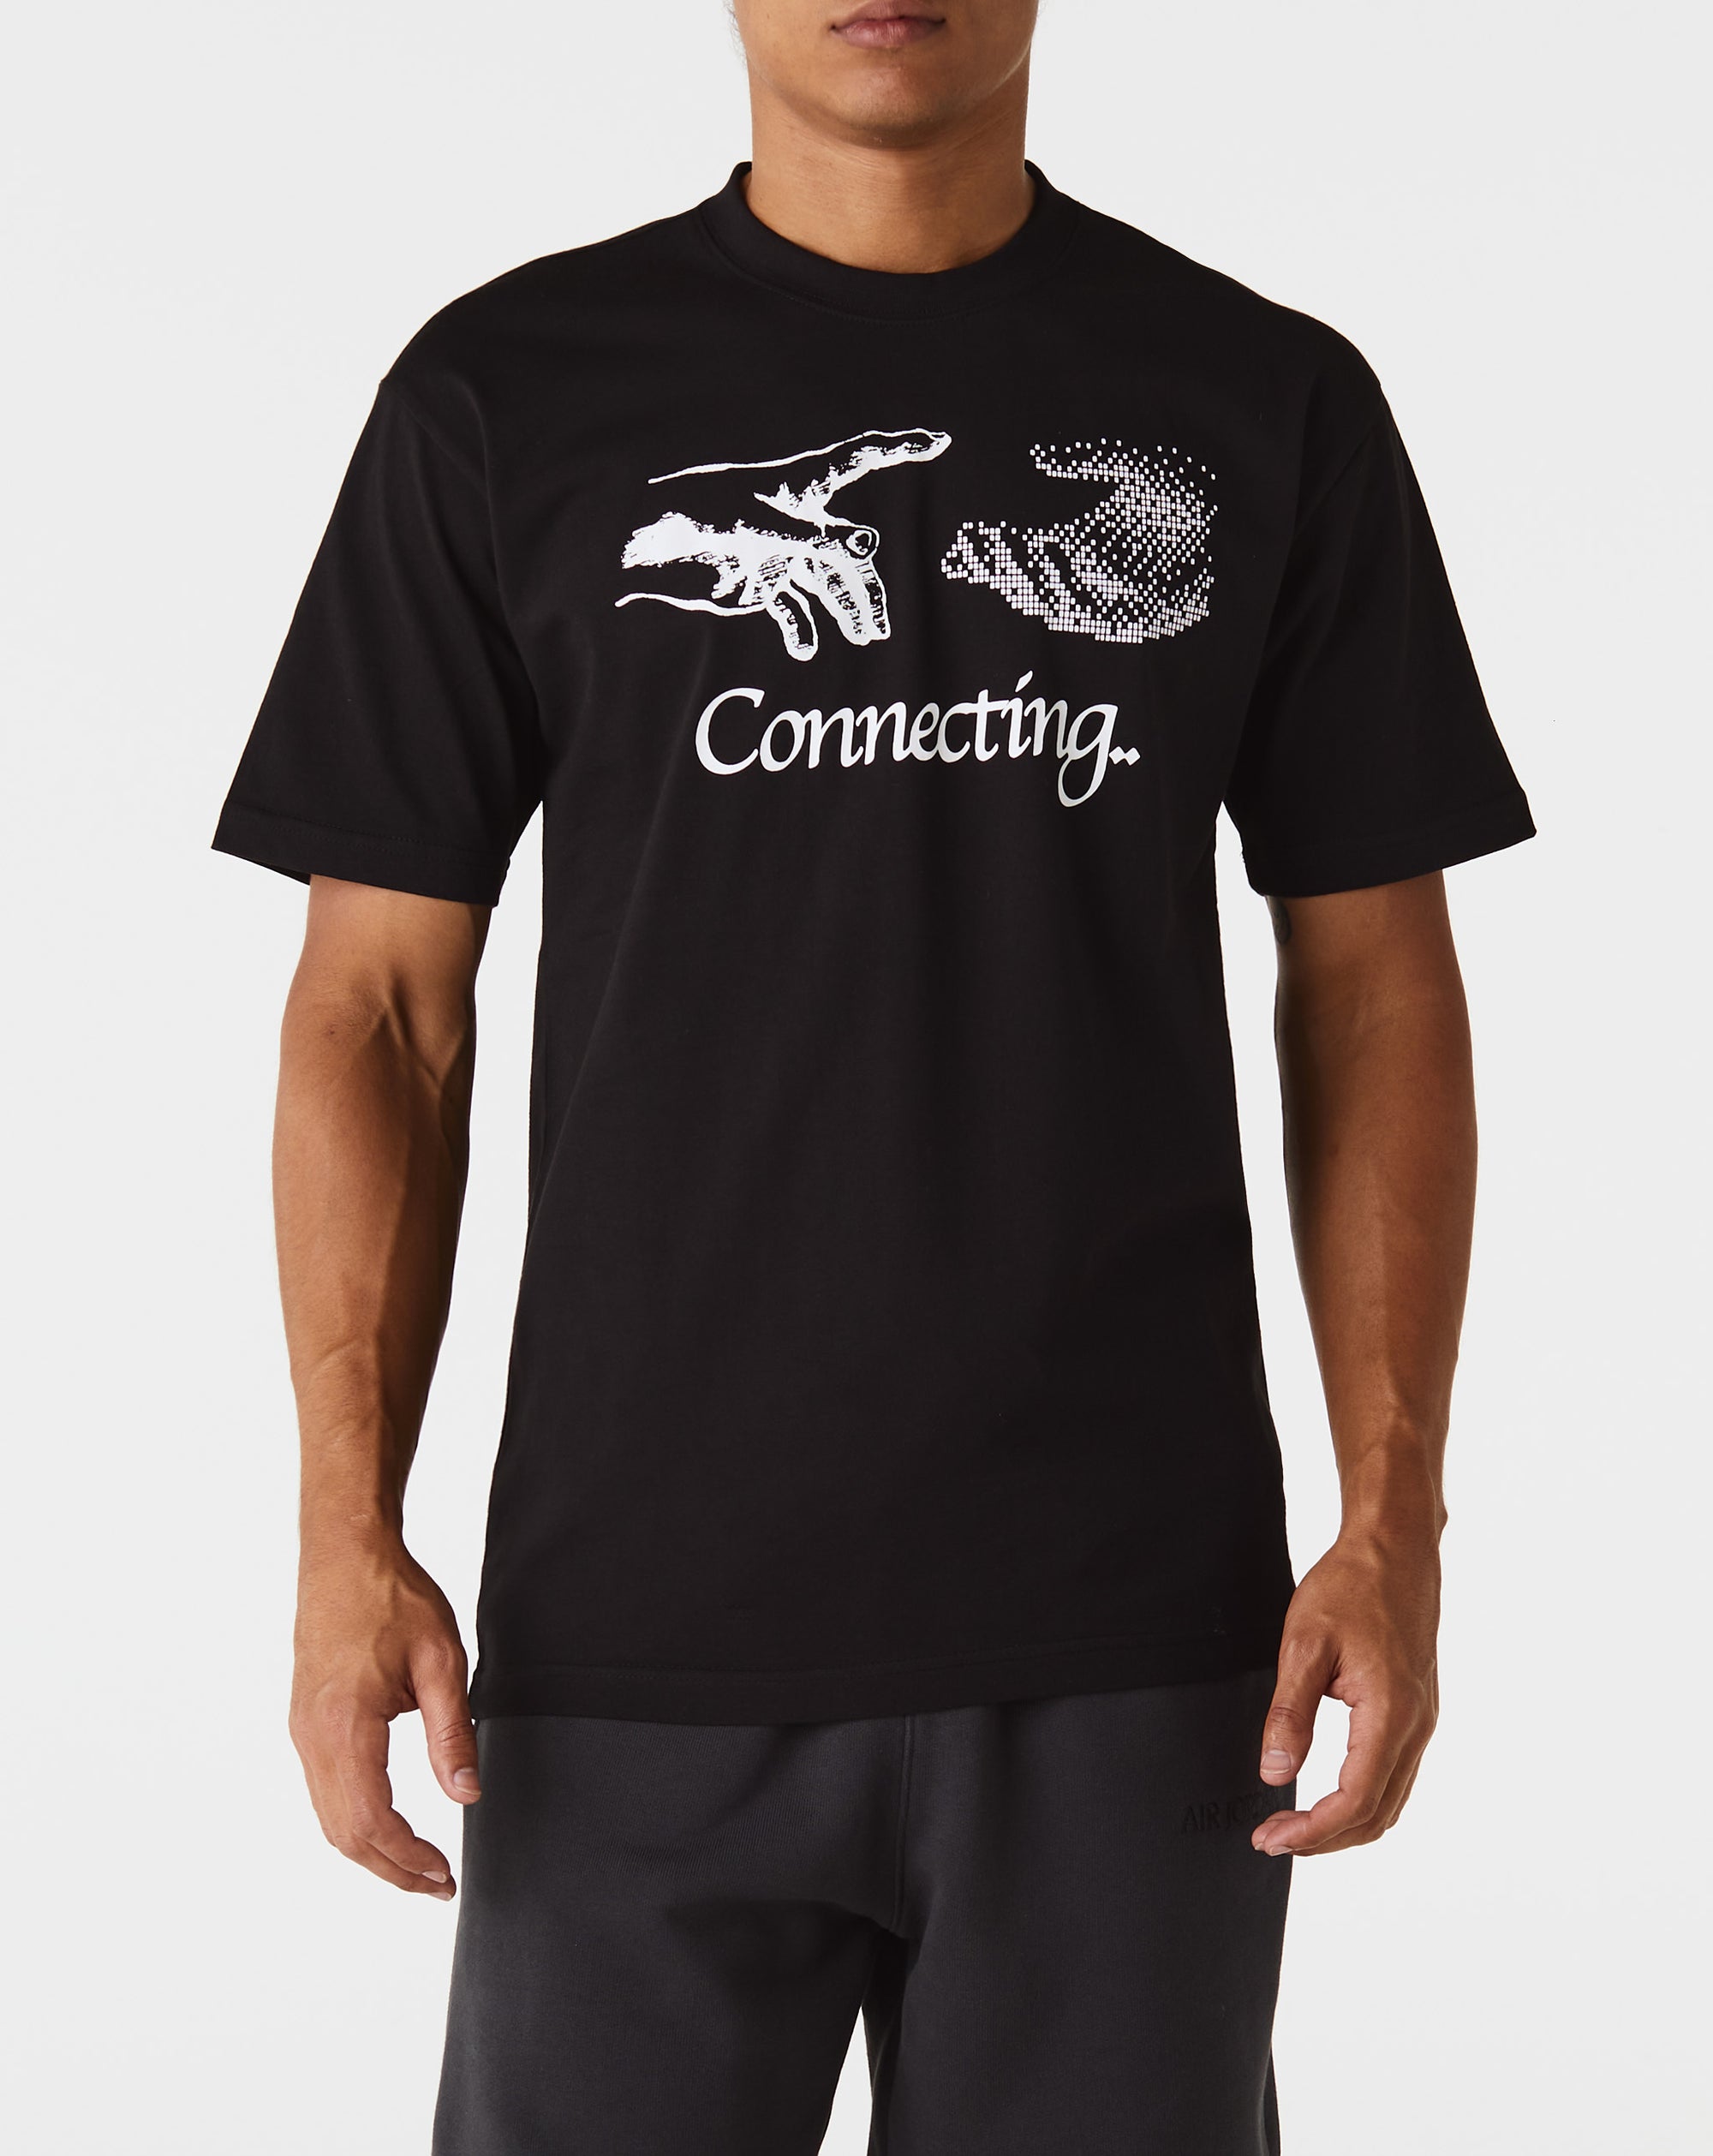 Market Connecting T-Shirt - Rule of Next Apparel